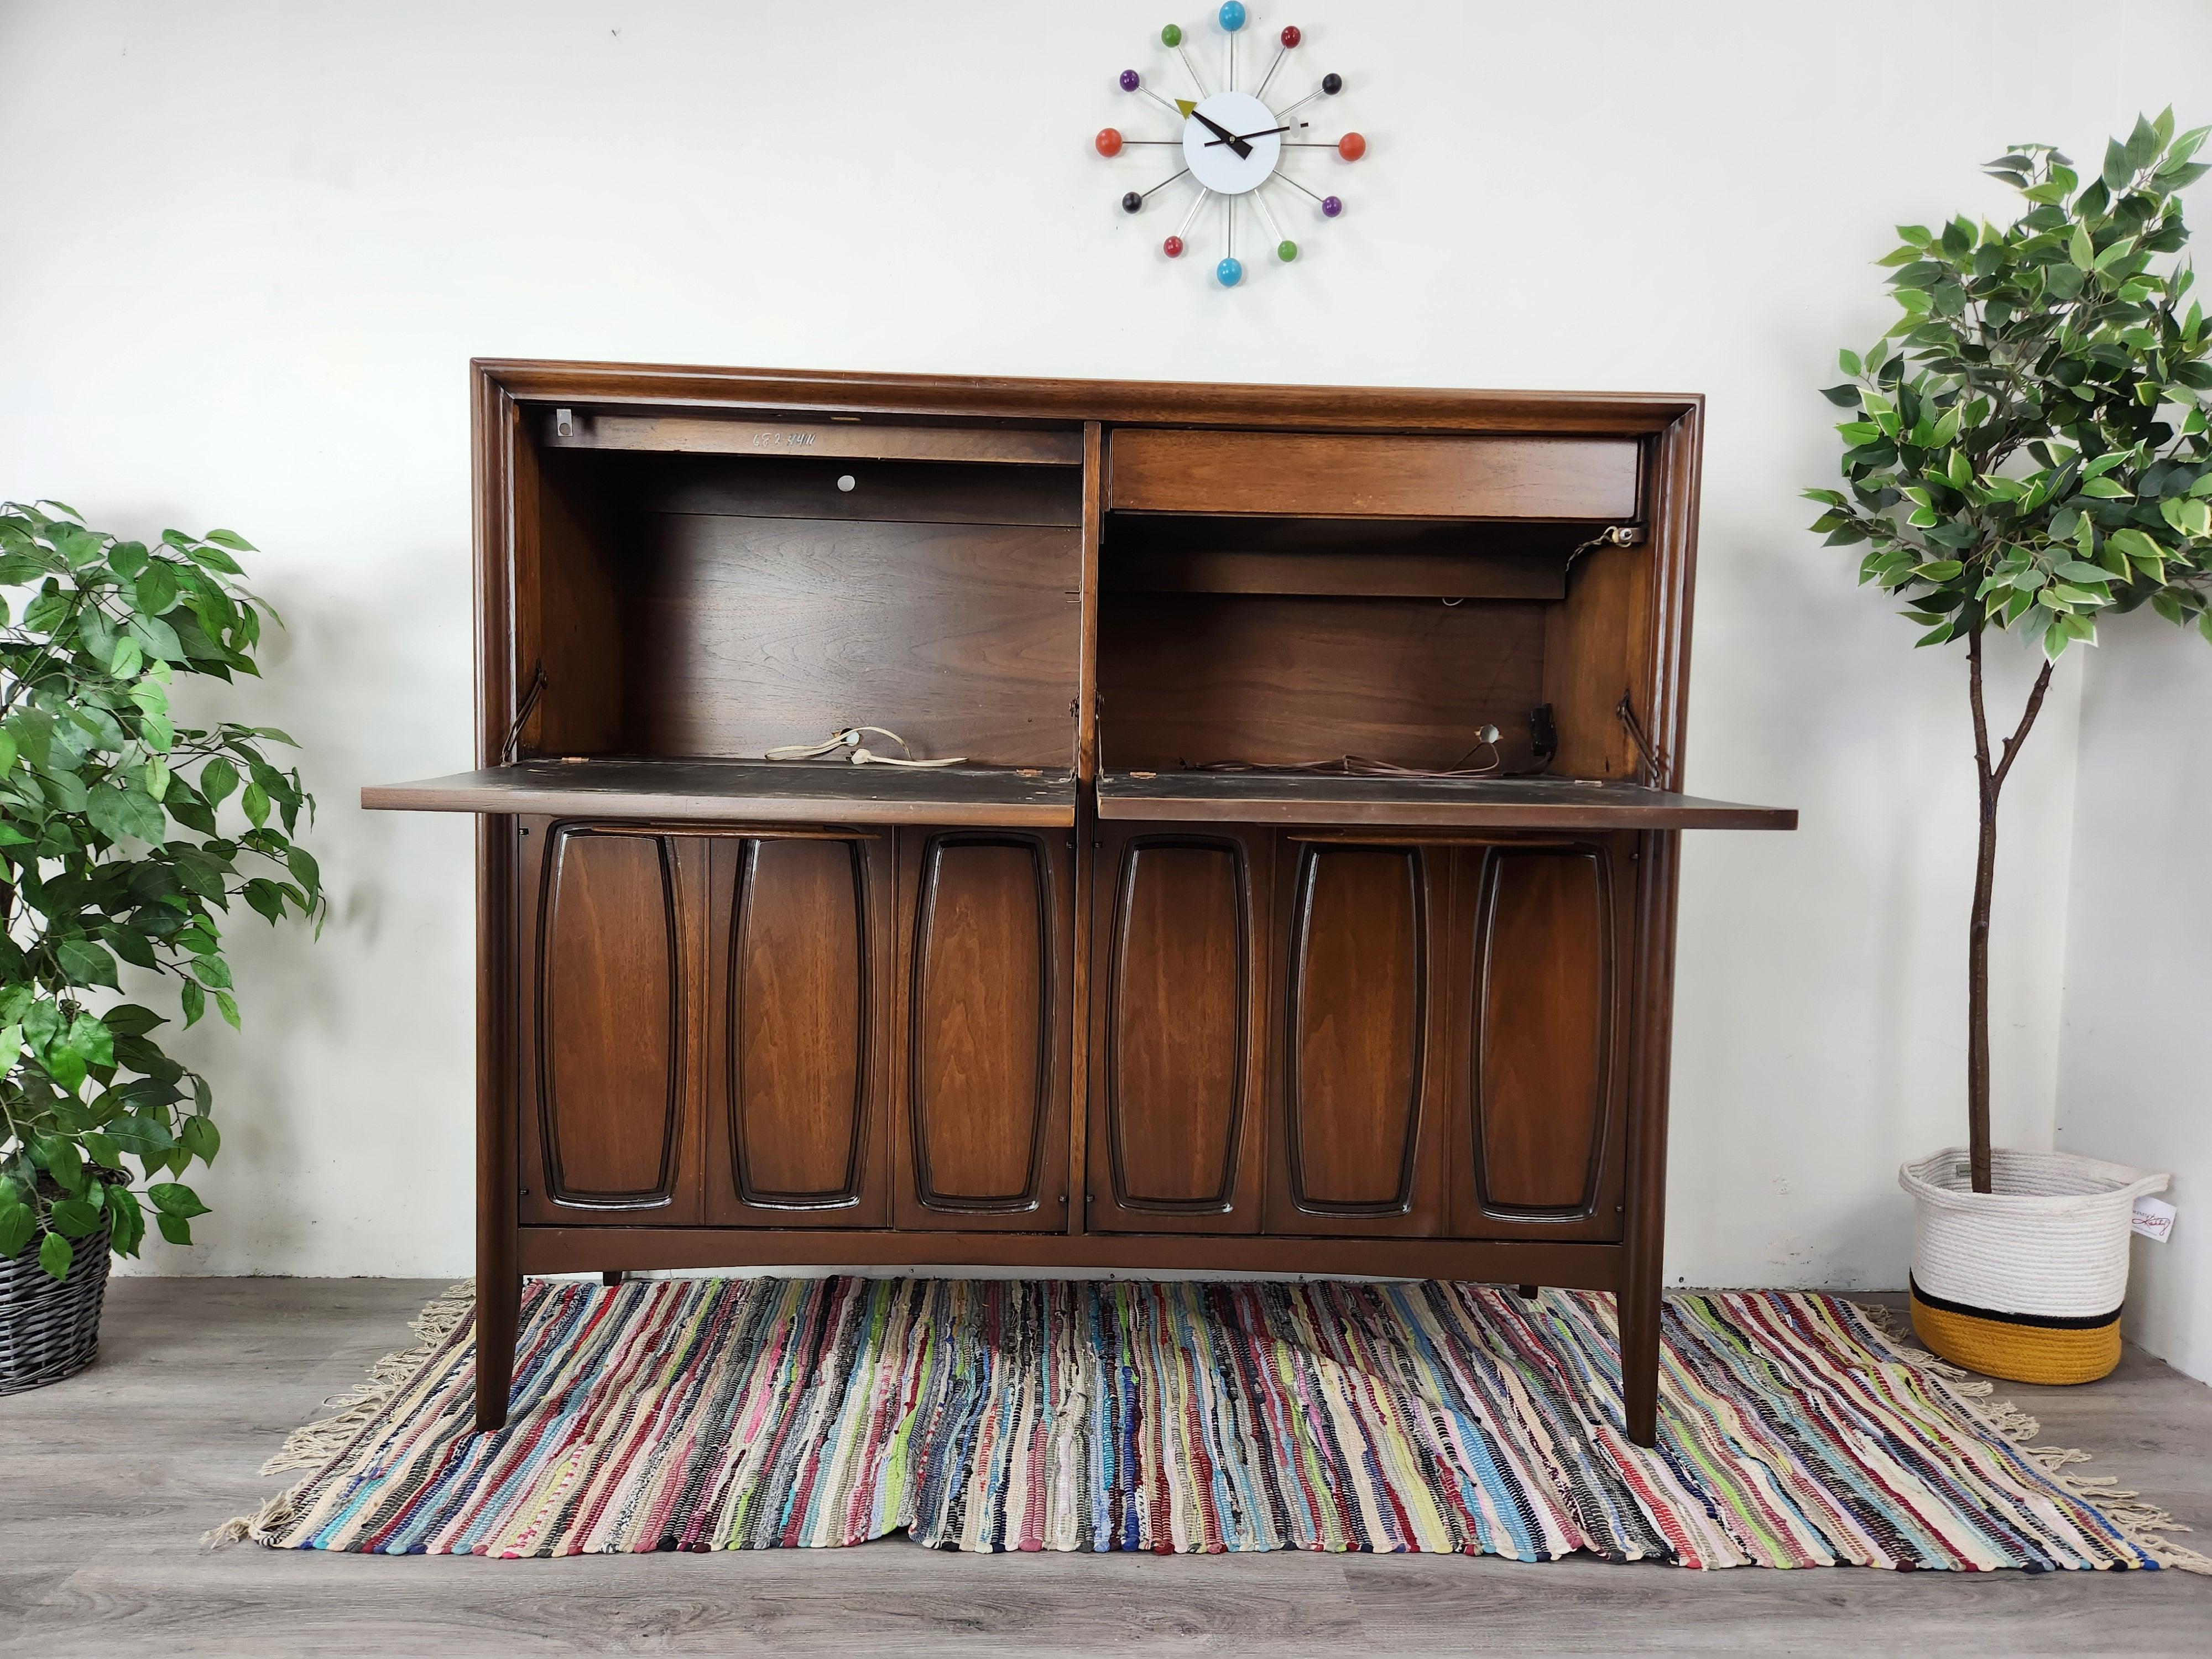 American Broyhill Emphasis Double Bar Cabinet Butlers Pantry Mid-Century Modern 